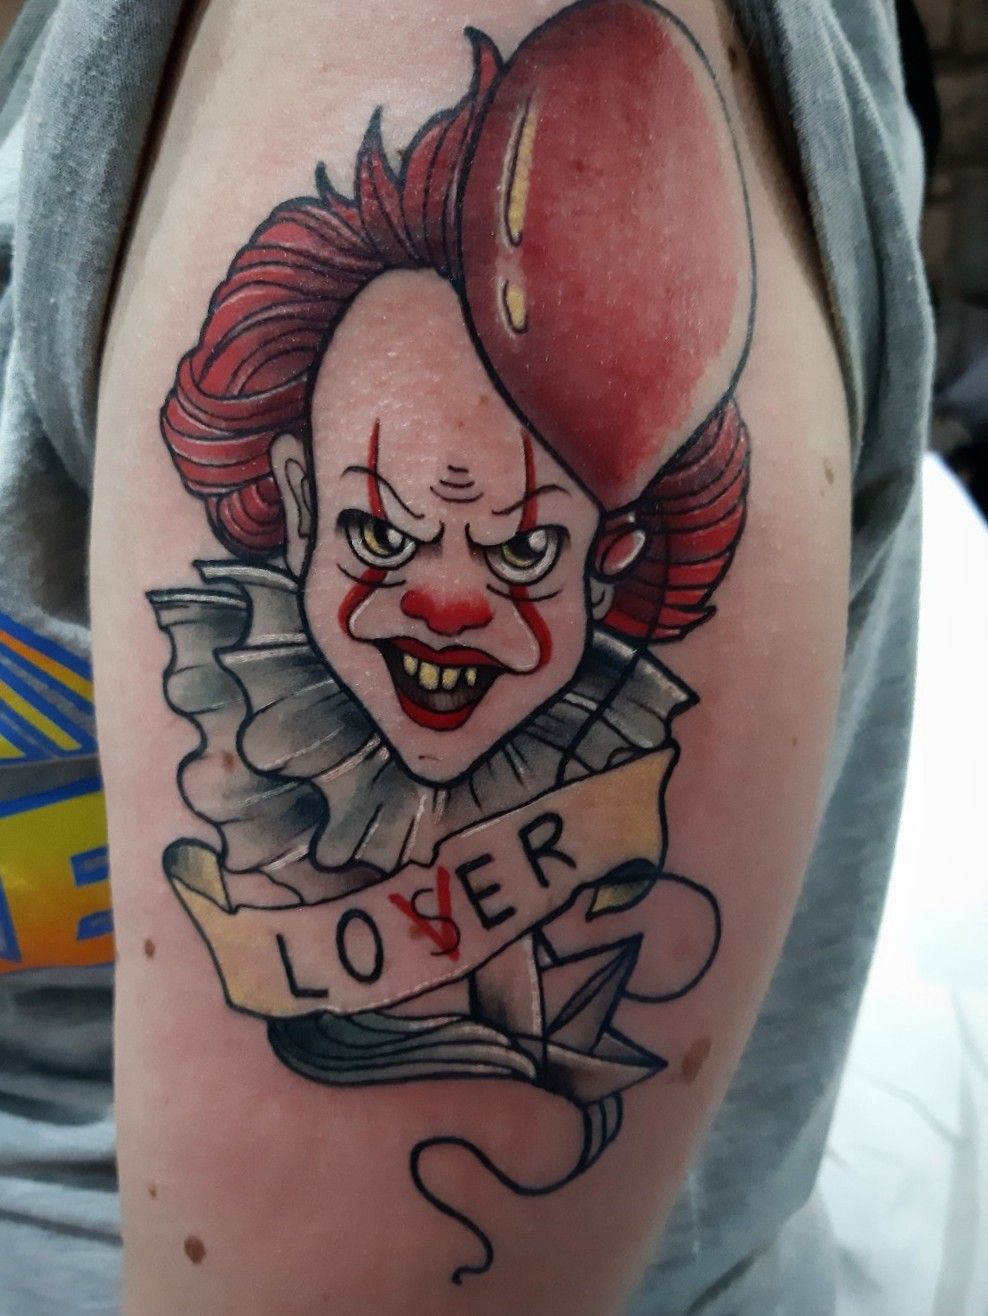 Pennywise the Clown by Evan Olin  Tattoos